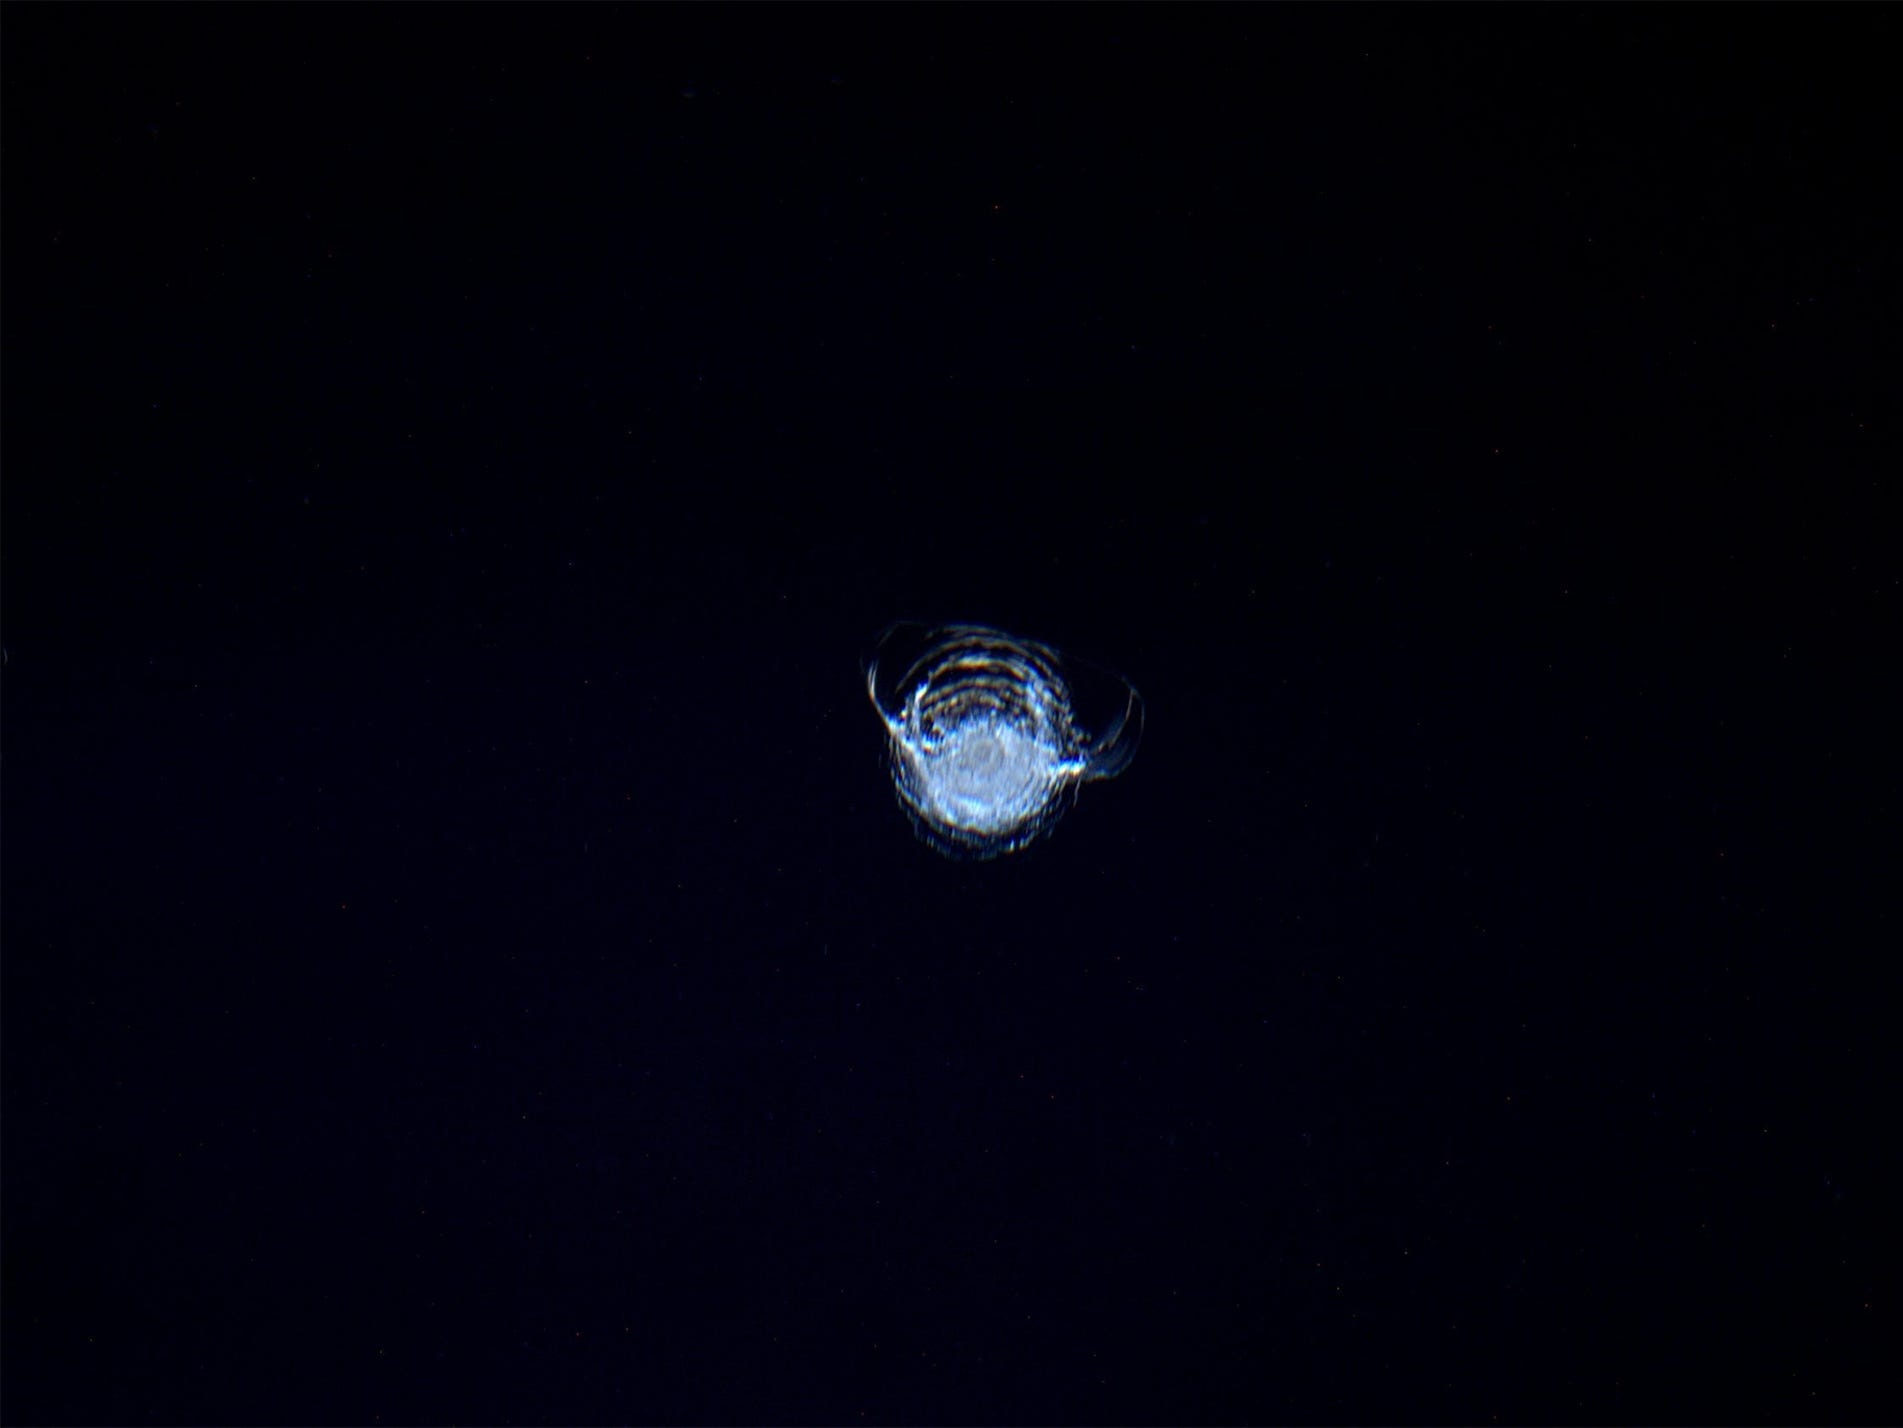 A chip in the ISS cupola taken by Astronaut Tim Peake is seen on a dark background